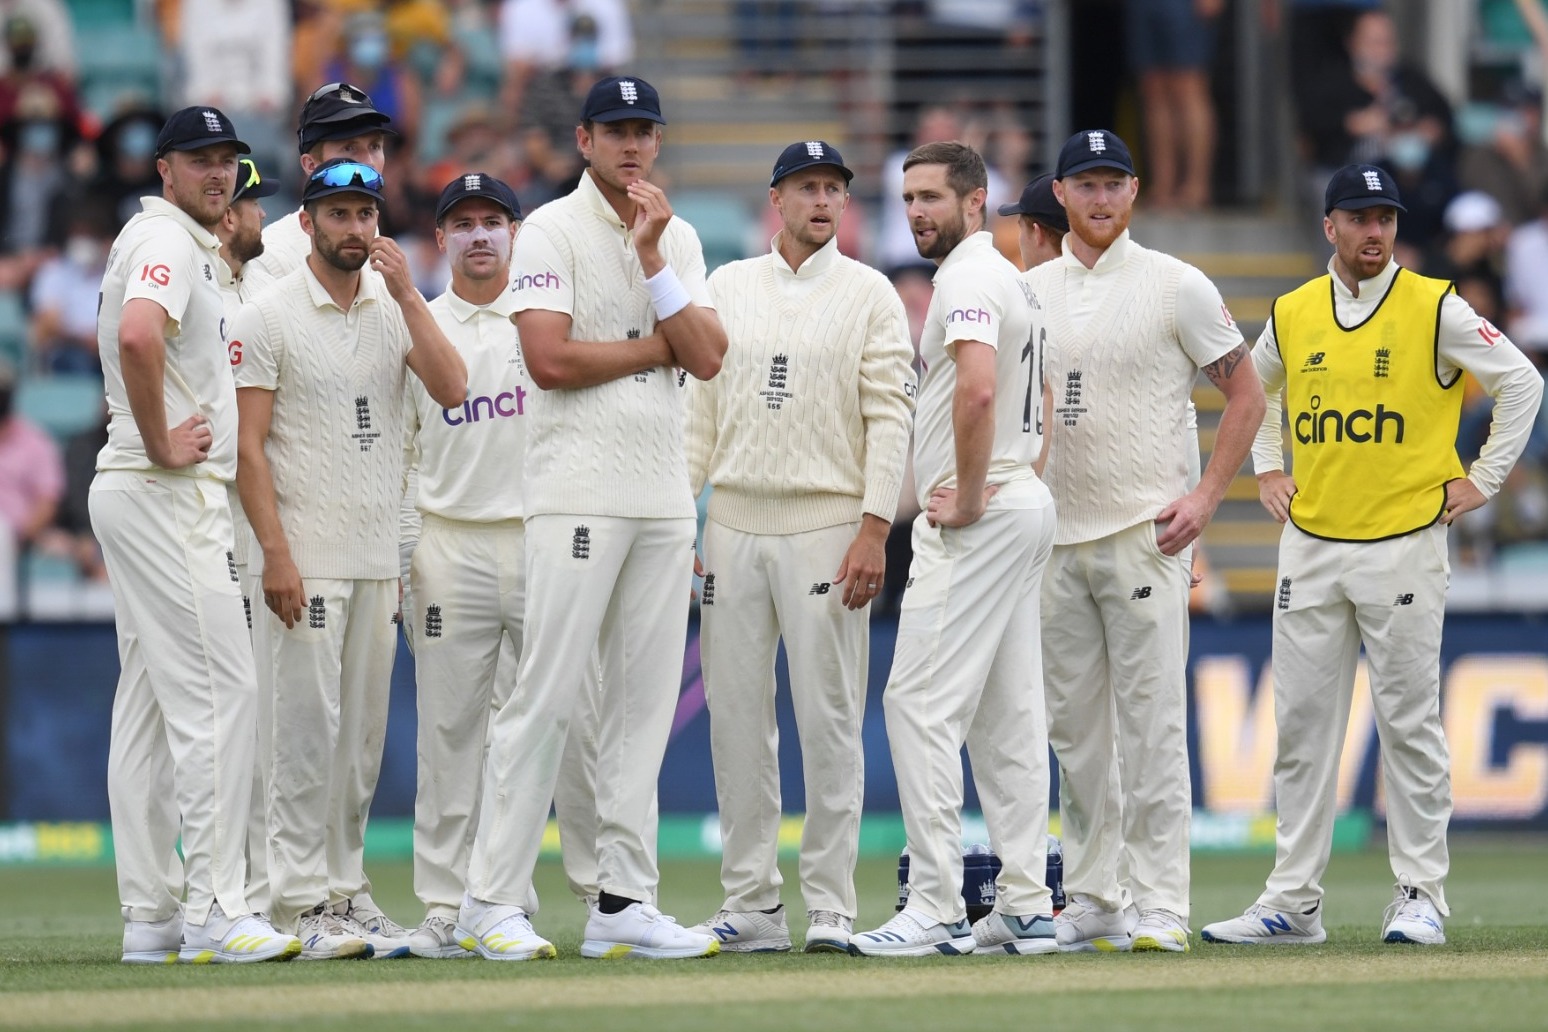 Chris Woakes happy to be among the wickets after ‘tough tour’ of West Indies 